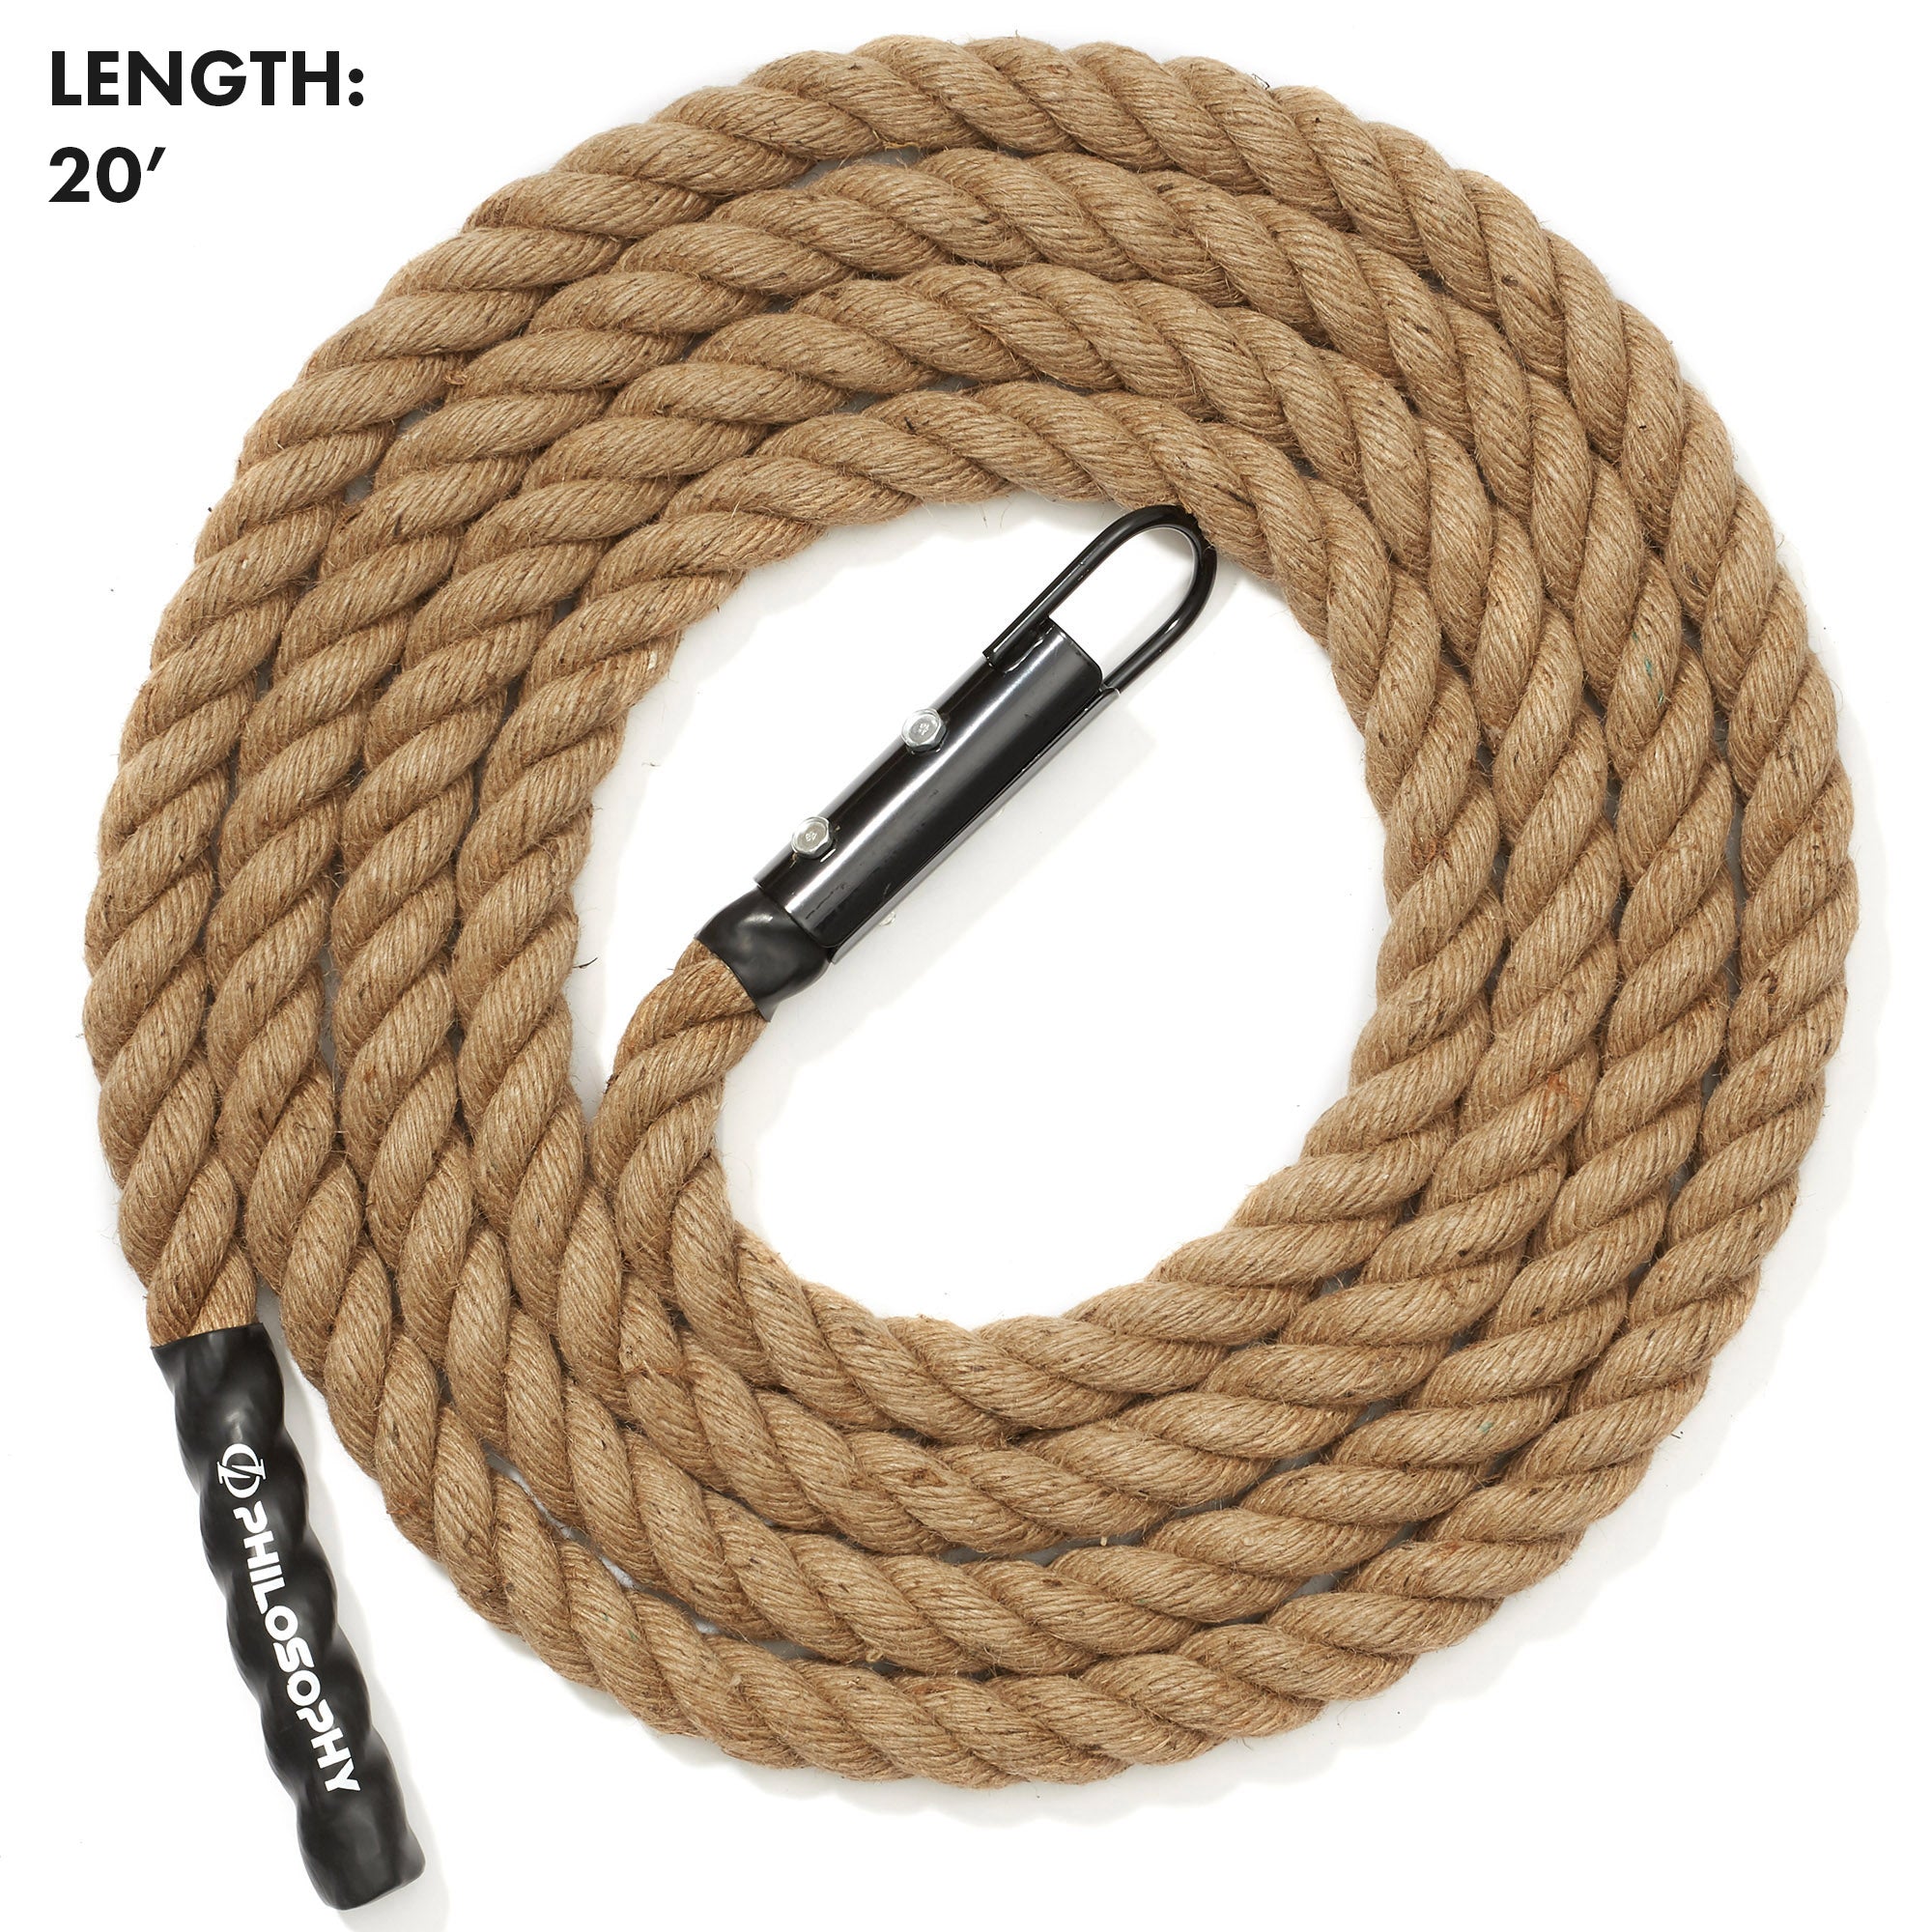 GSE 1.5 Gym Climbing Rope, Workout Rope for Indoor/Outdoor and Home Workouts. Great for Climbing Exercises, Strength Training - 6-ft